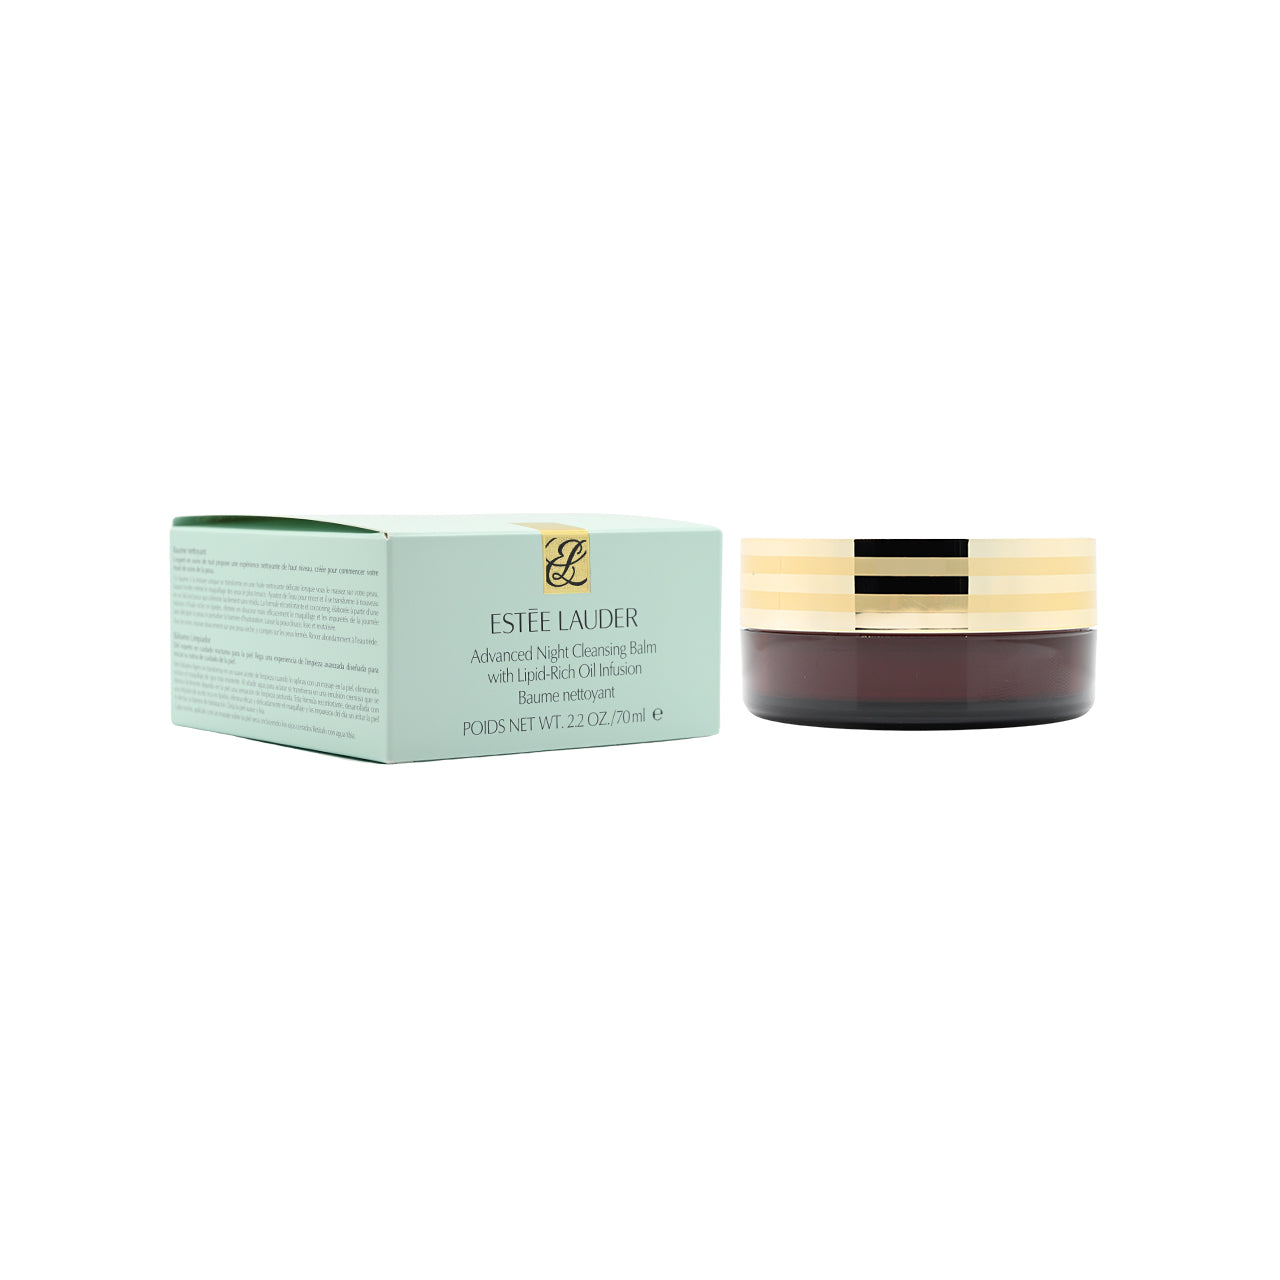 Estee Lauder Advanced Night Cleansing Balm Cleanser with Lipid-Rich Oil Infusion 70ml | Sasa Global eShop